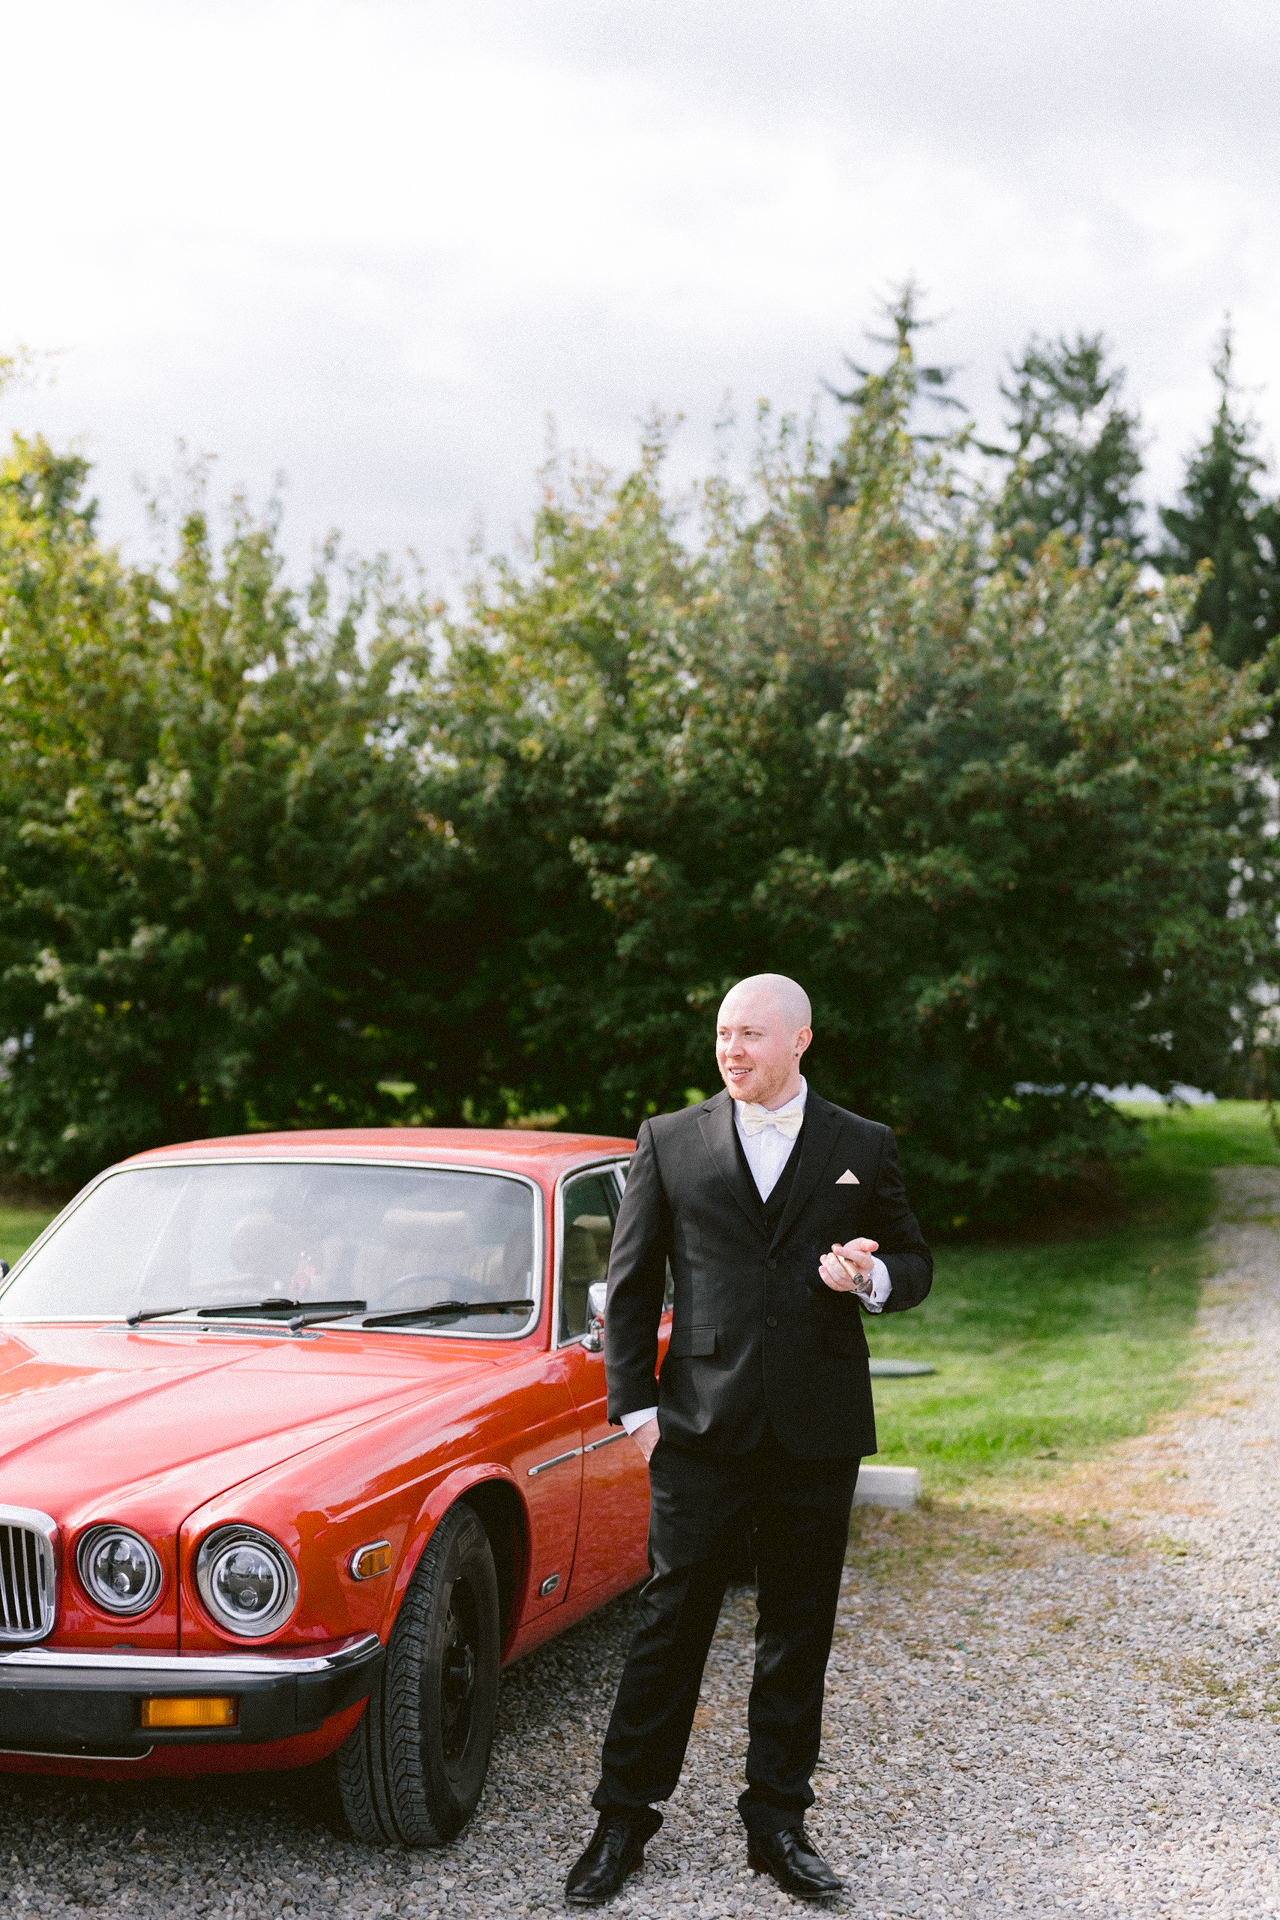 A man with a cigar posing besides a red vintage car.